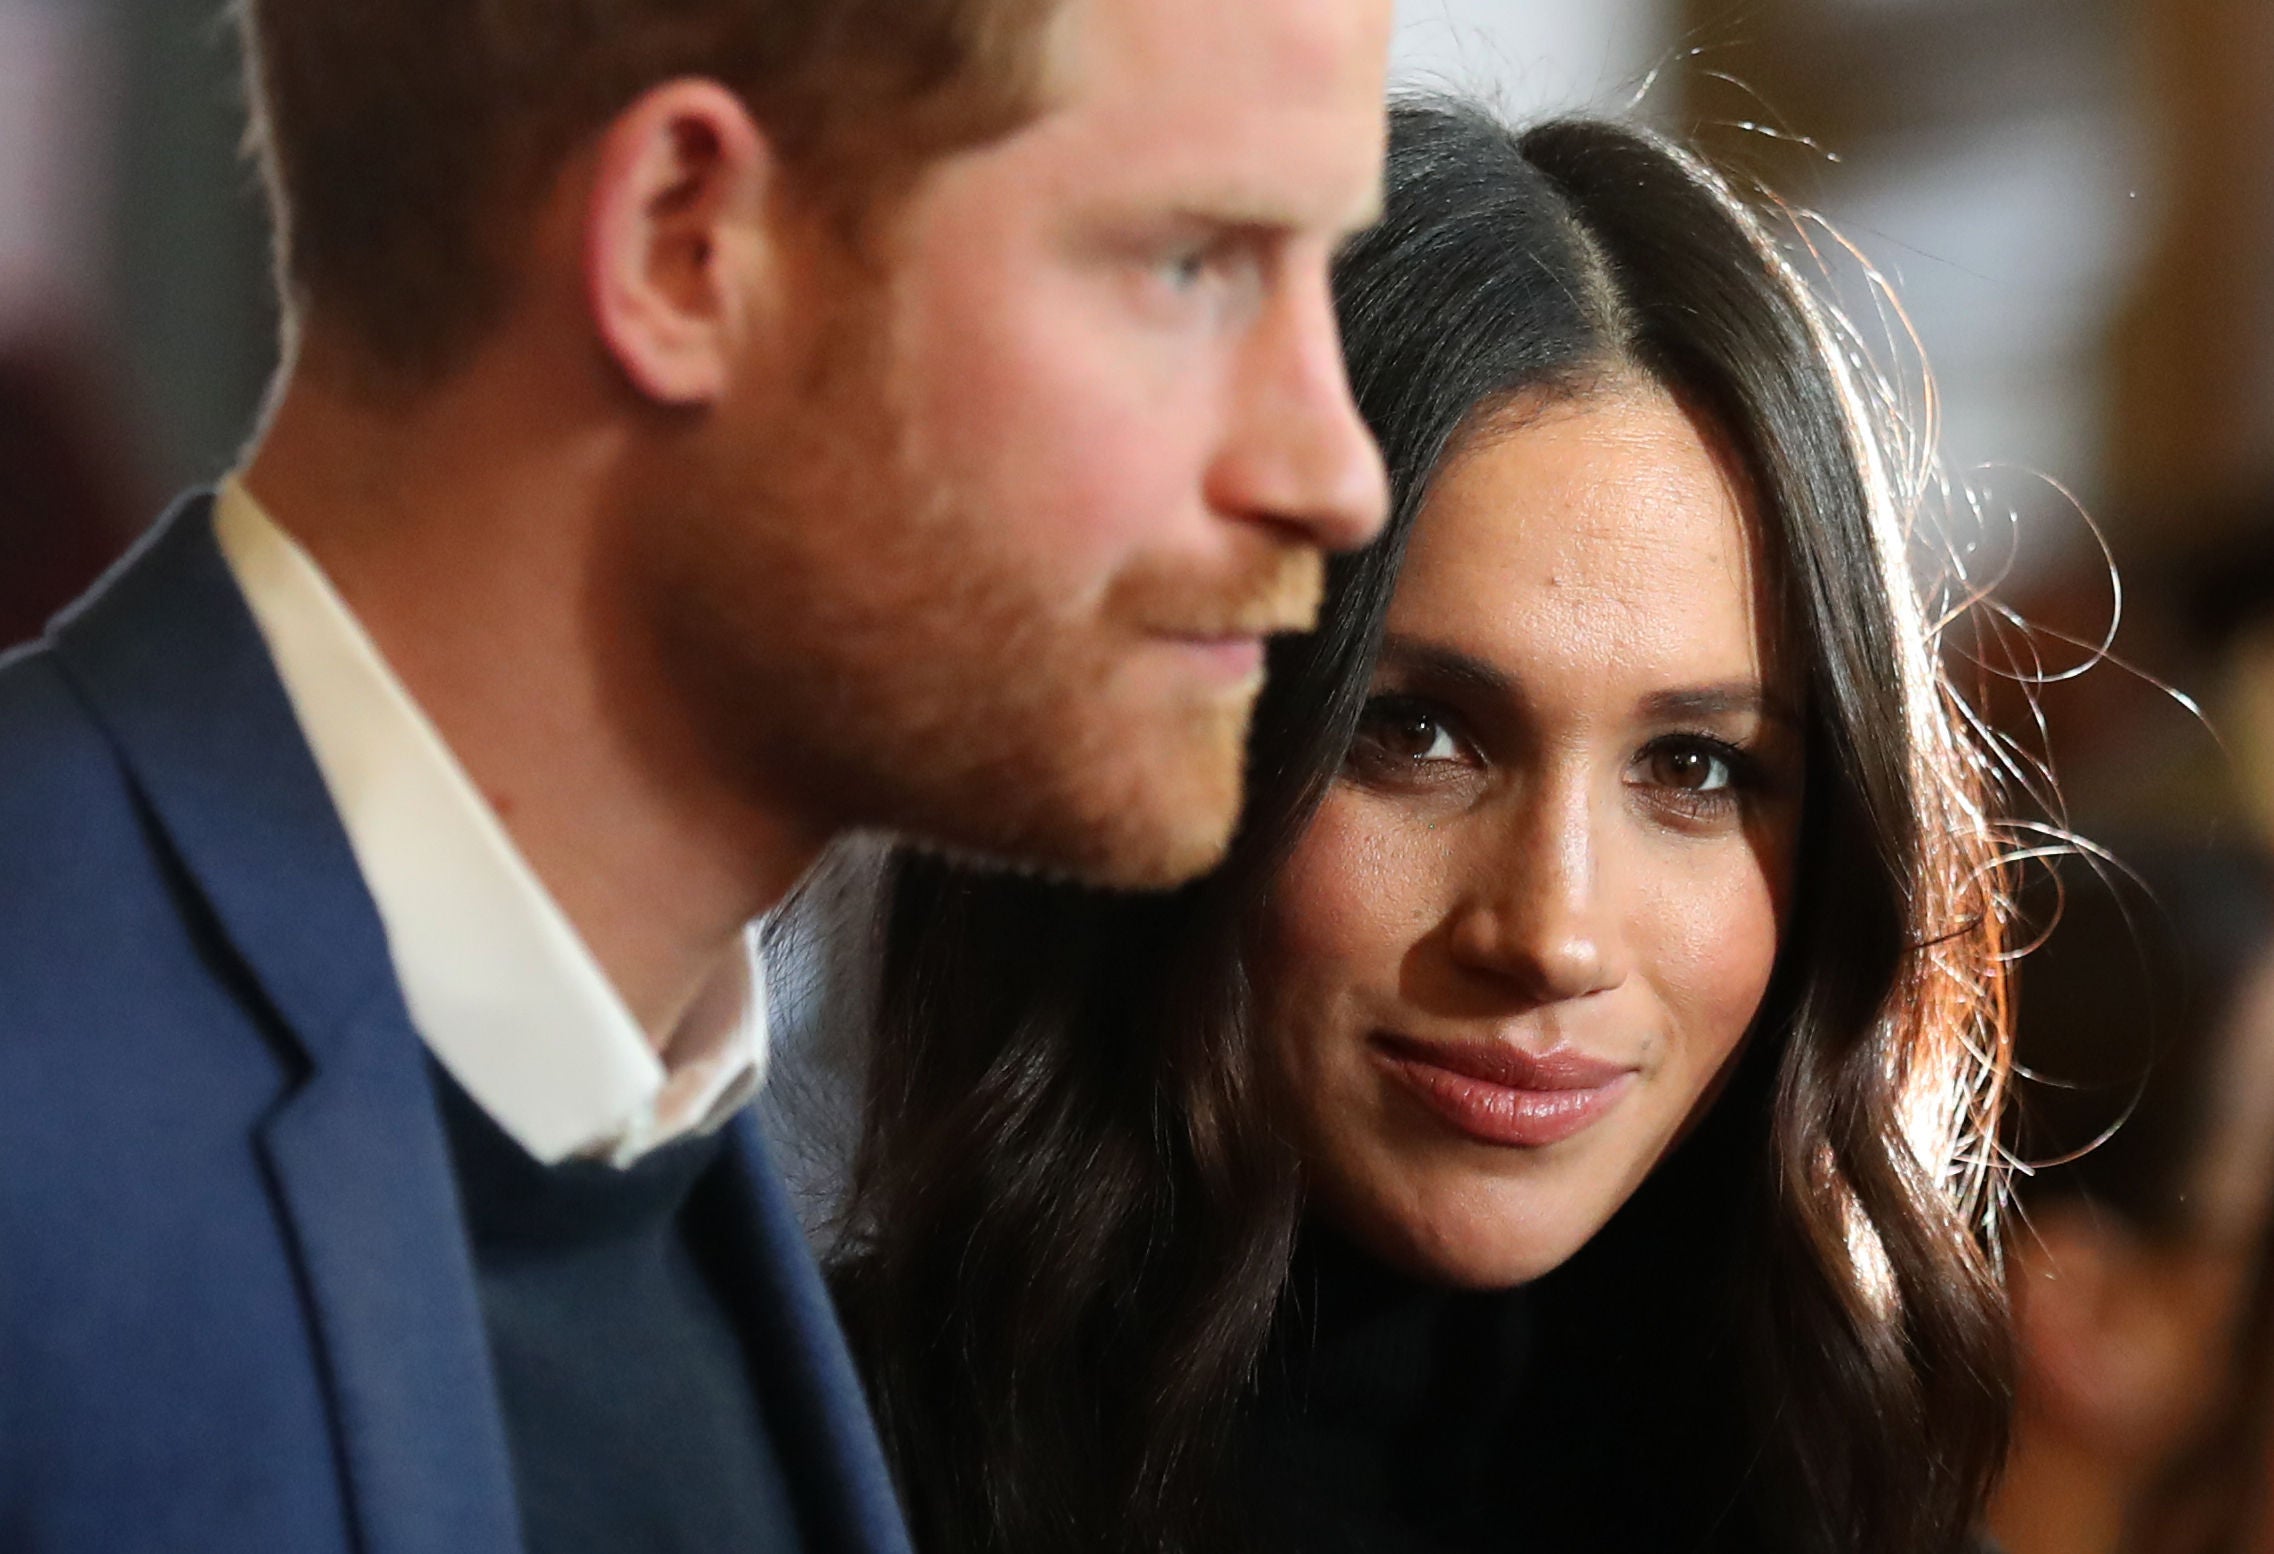 Meghan and Harry were very much taking the initiative and dictating their own terms, rather than being pushed out